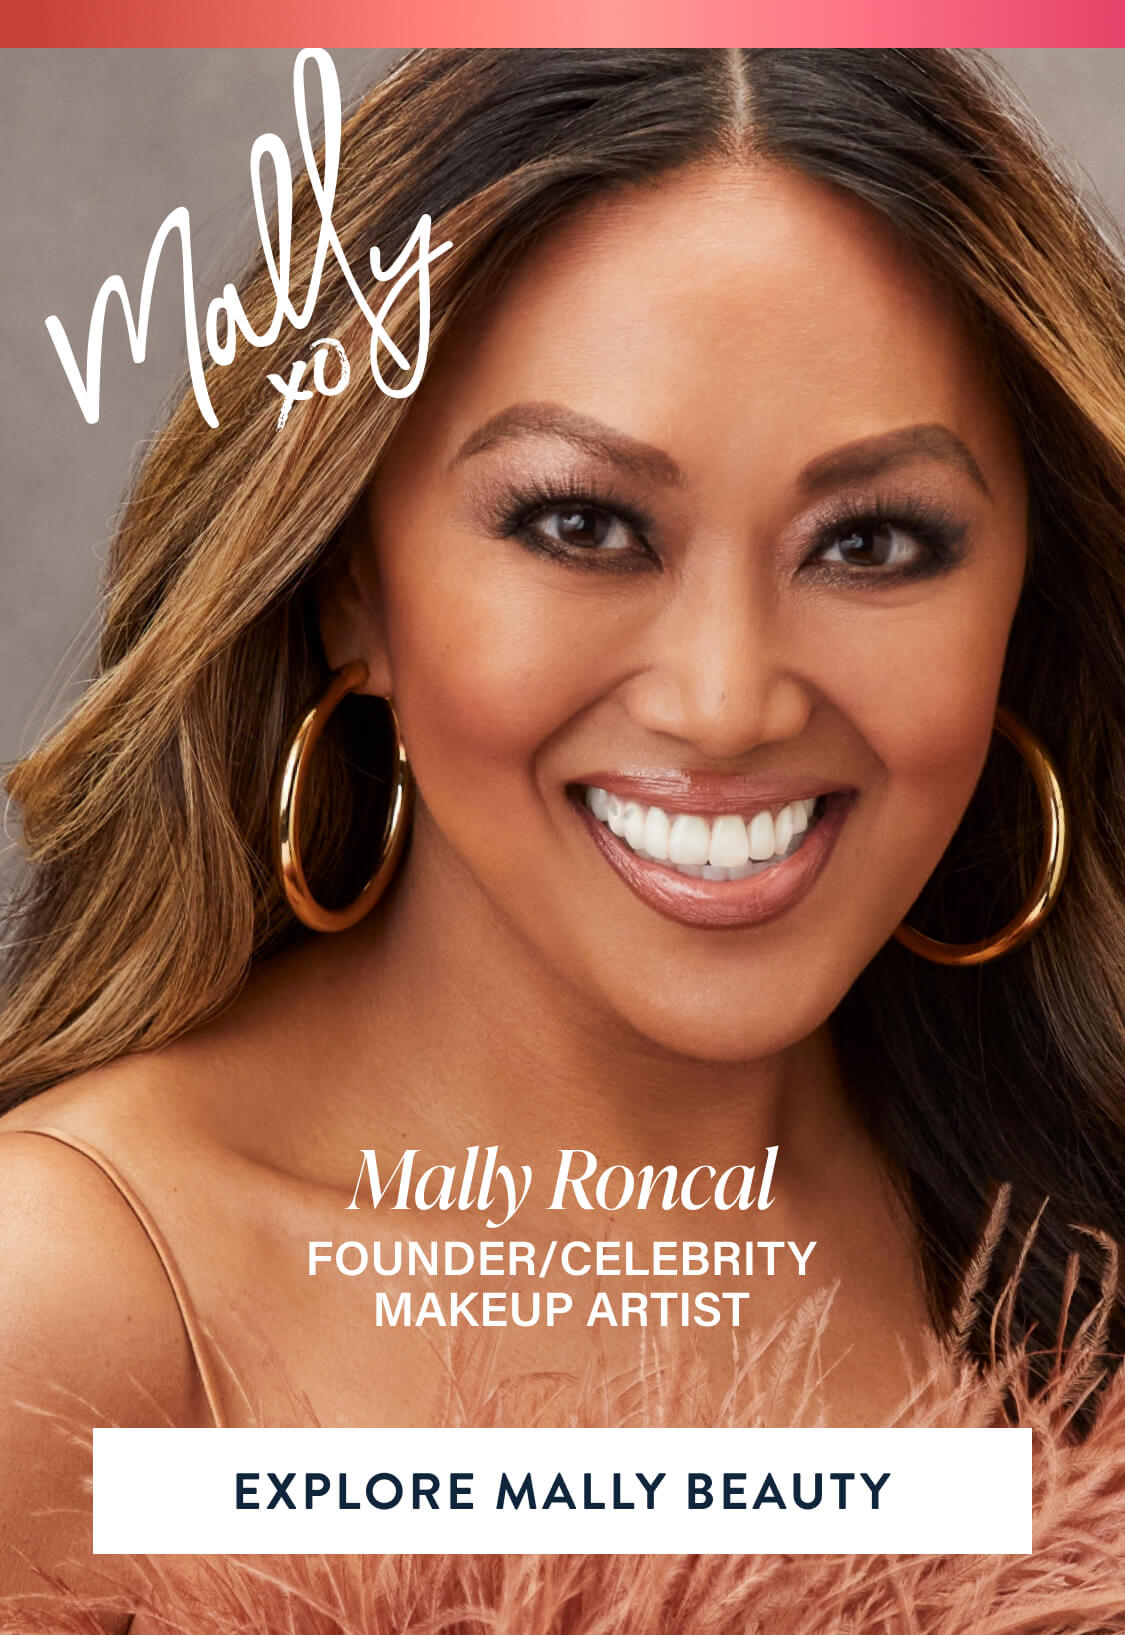 Mally Roncal. Founder / Celebrity Makeup Artist. Explore Mally Beauty.